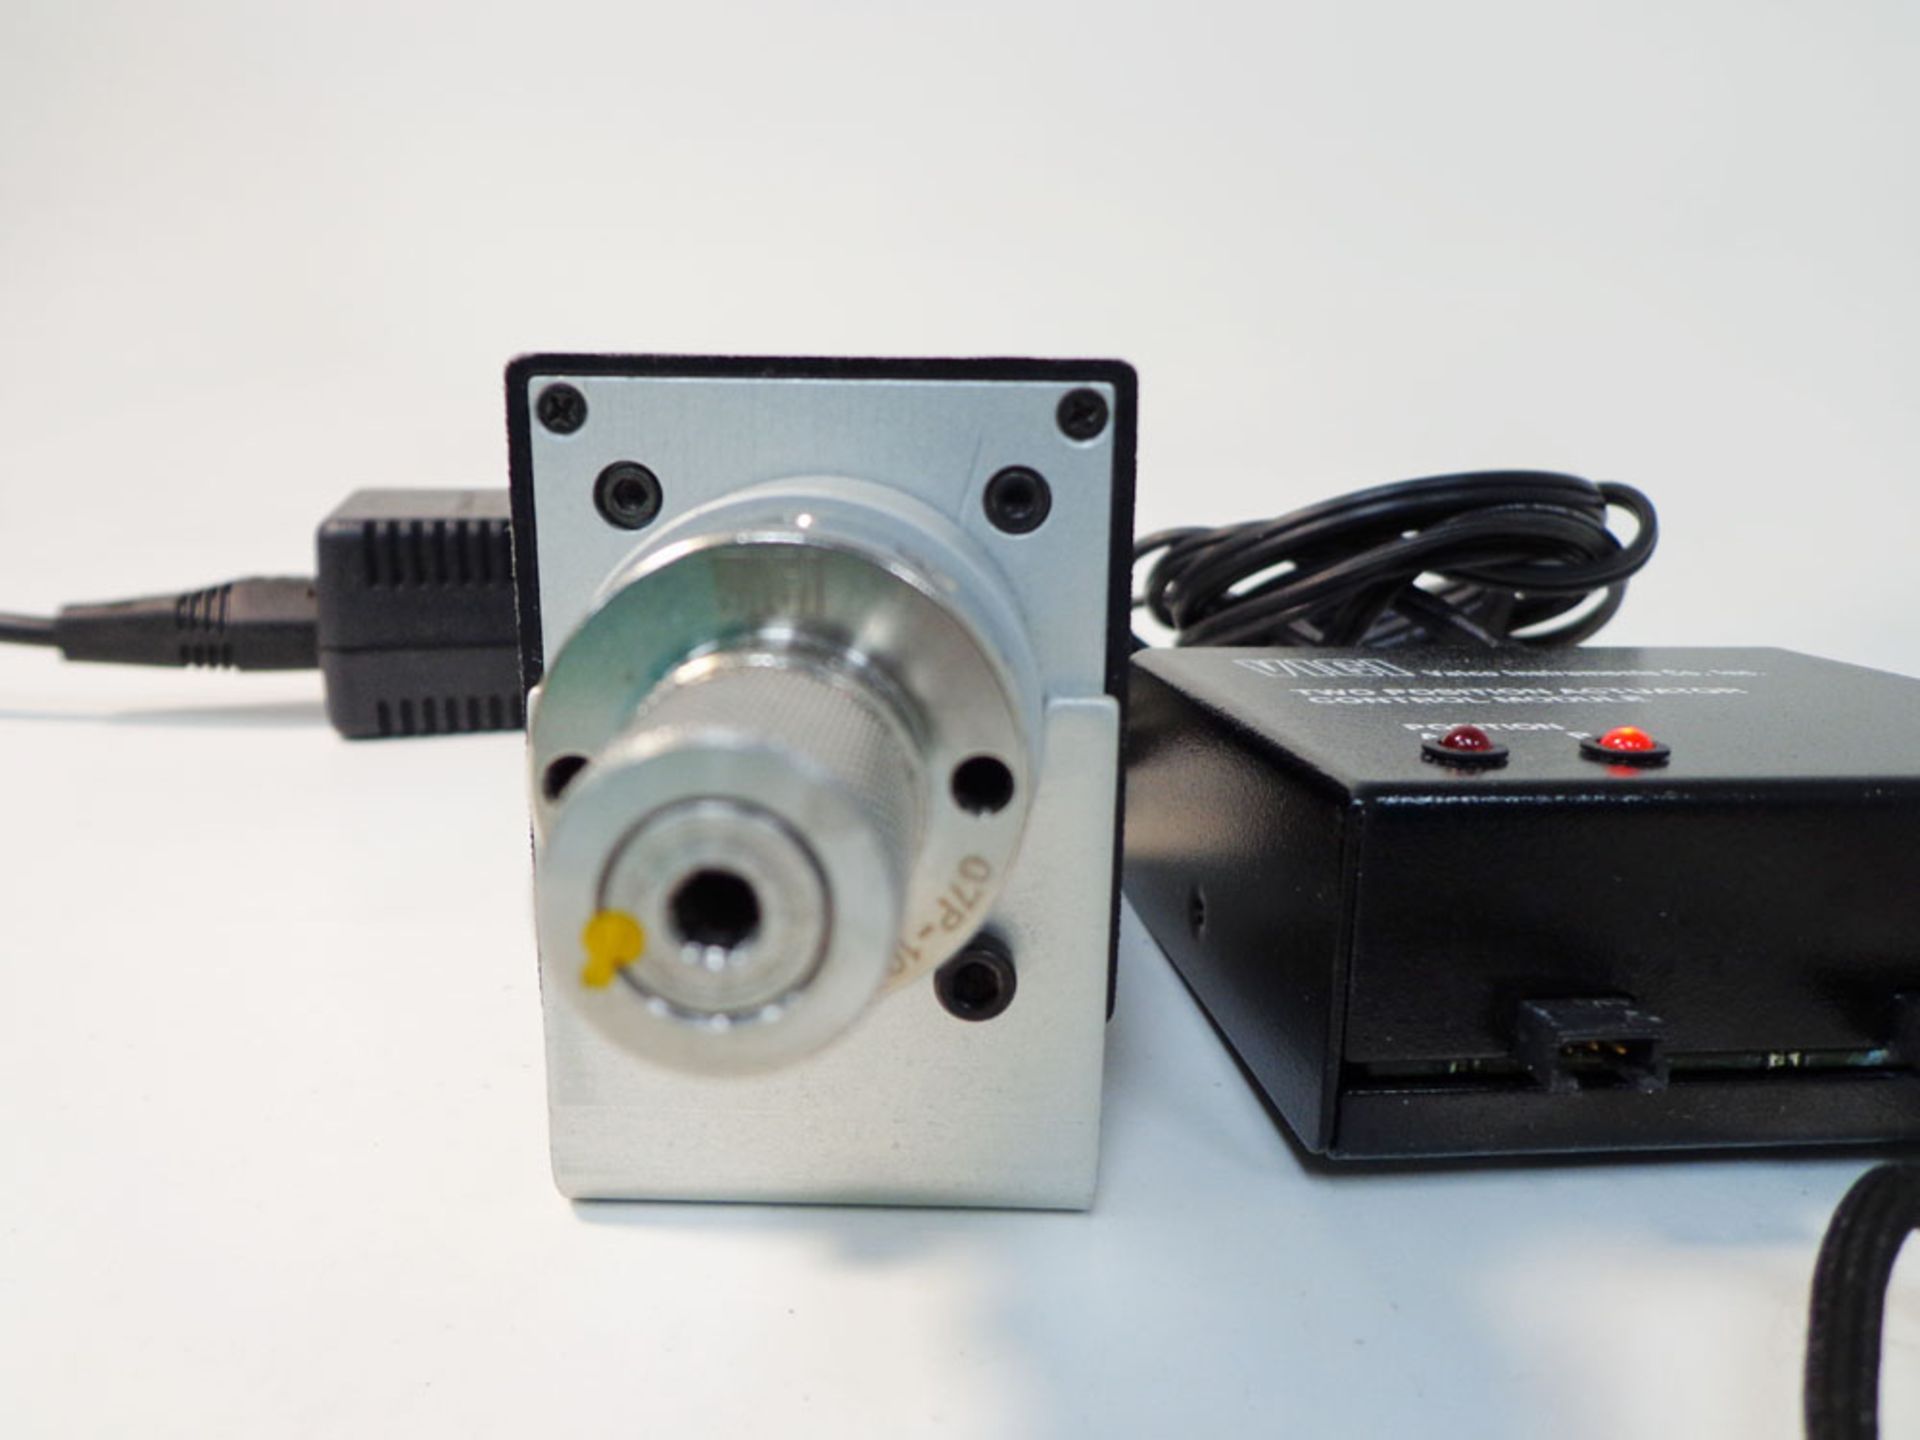 Vici Valco Instruments Modular Universal Valve/Actuator, Model EHMA, with Two Position Actuator - Image 4 of 8